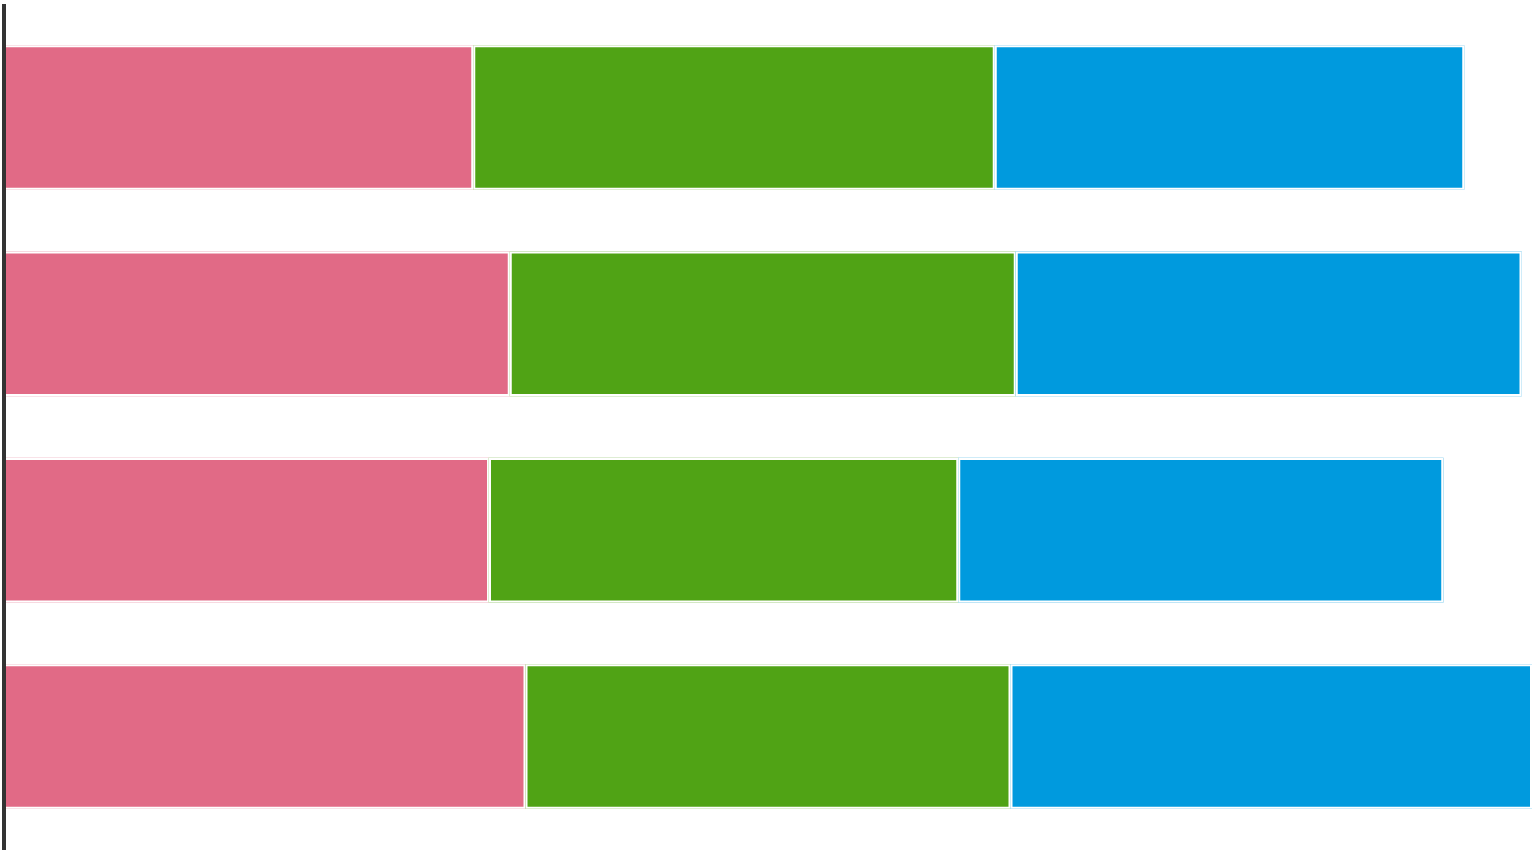 4 horizontal stacked bars, with pink, green and blue bars